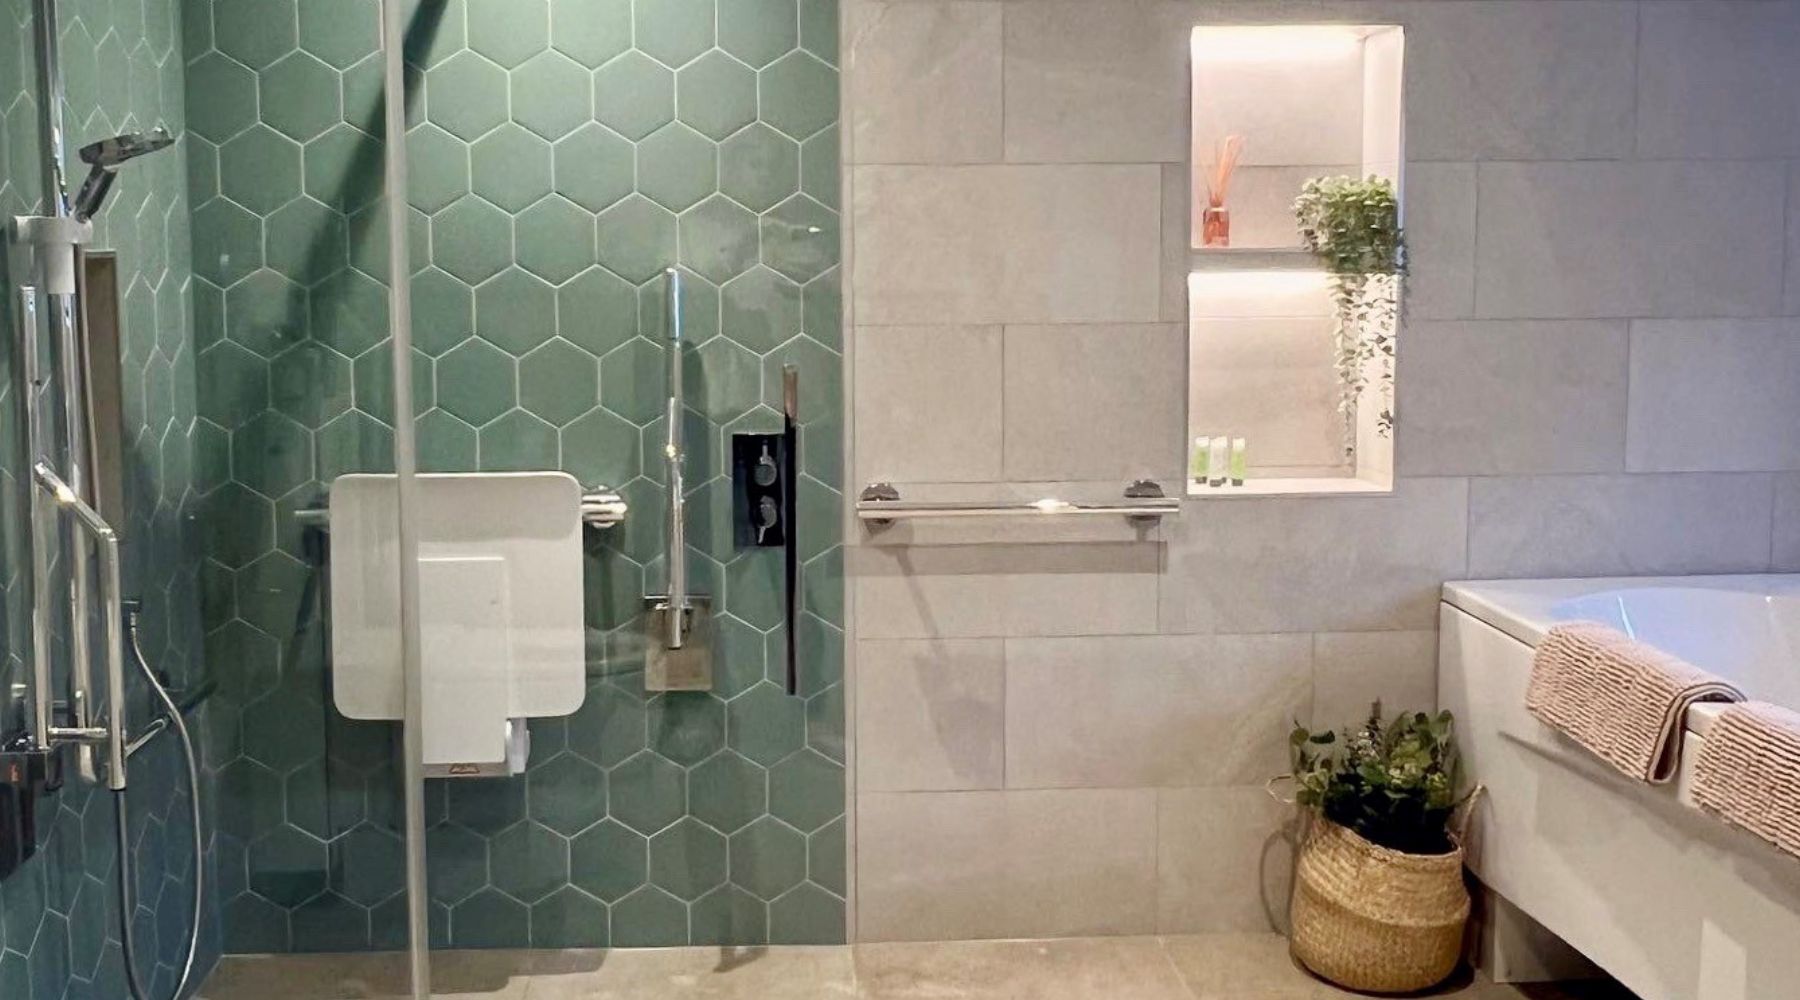 AbleStay's accessible bathroom including hexagon tiles in Timeless Jade, shower arm, hose and valve, bi-folding shower screen, chrome grab rails and wall mounted shower seat.